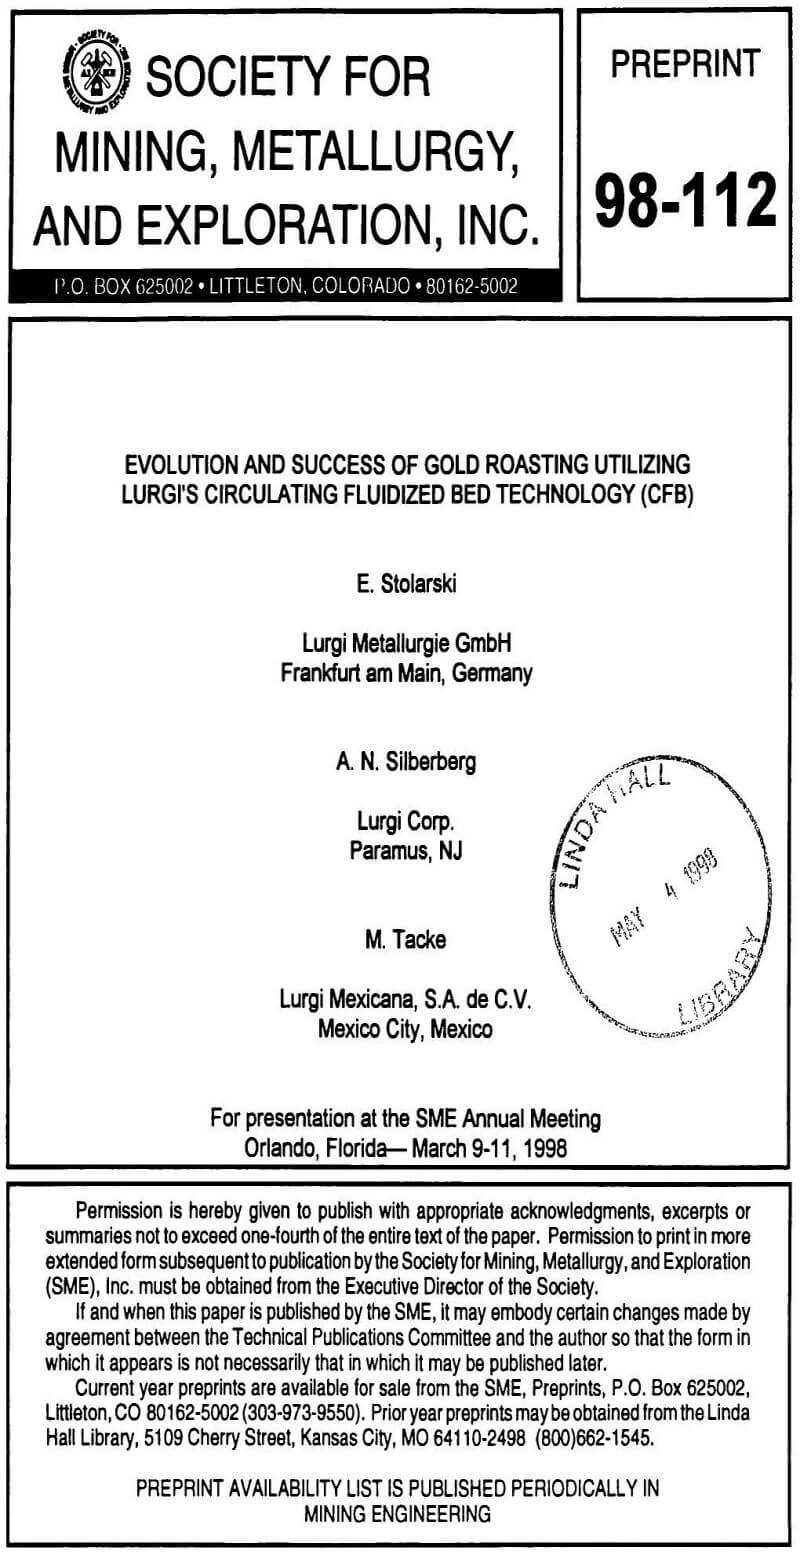 evolution and success of gold roasting utilizing lurgi's circulating fluidized bed technology (cfb)